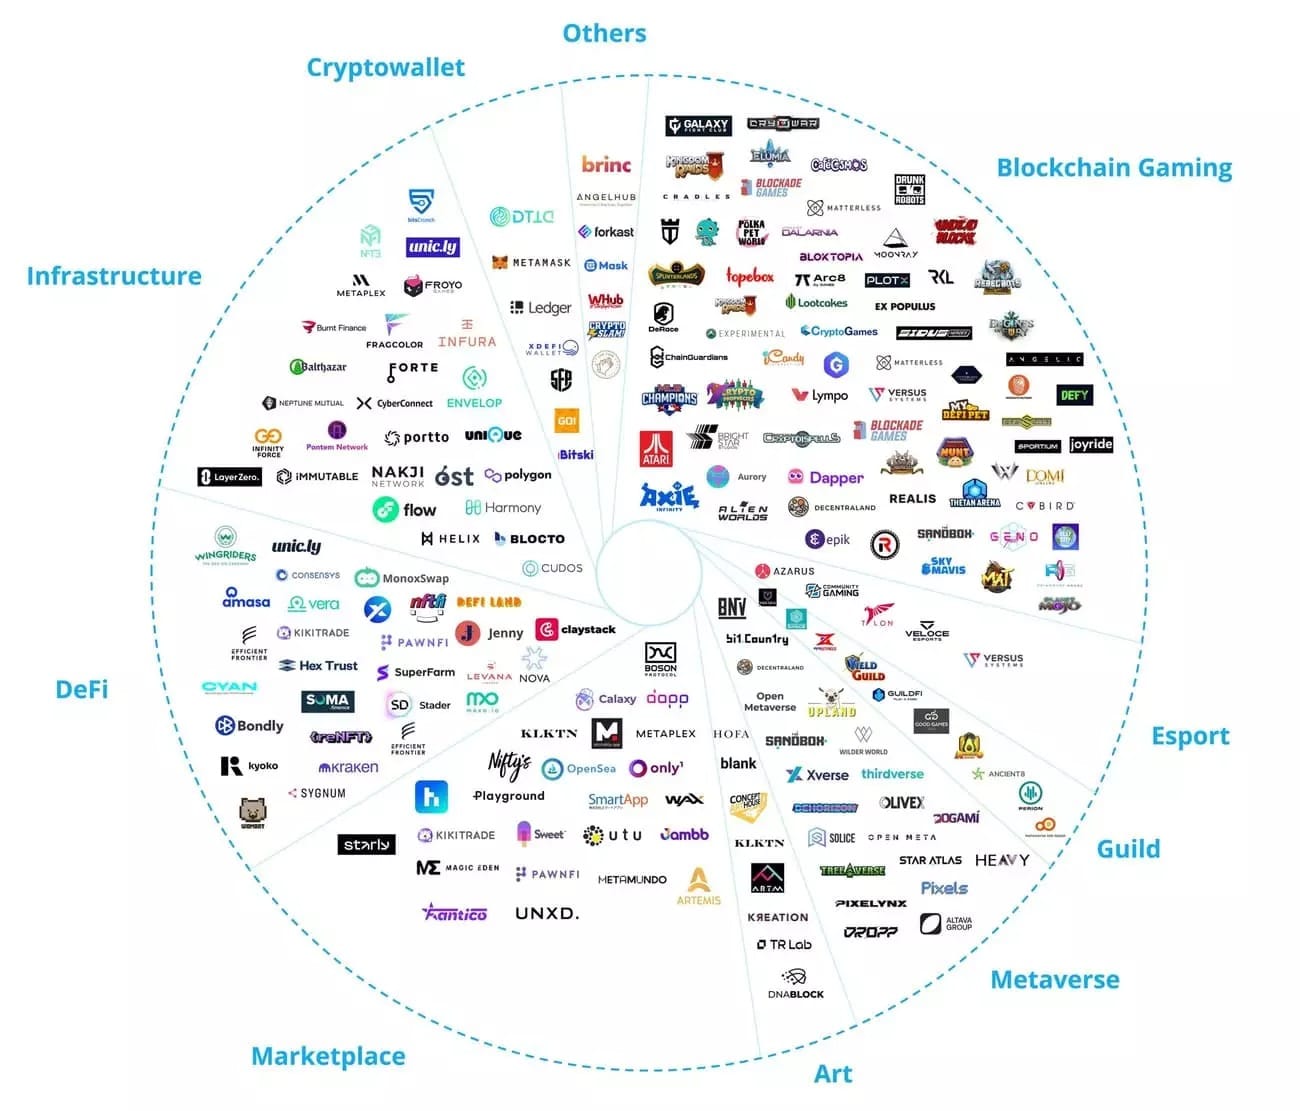 Overview of Animoca Brands' investments in the Web3 universe